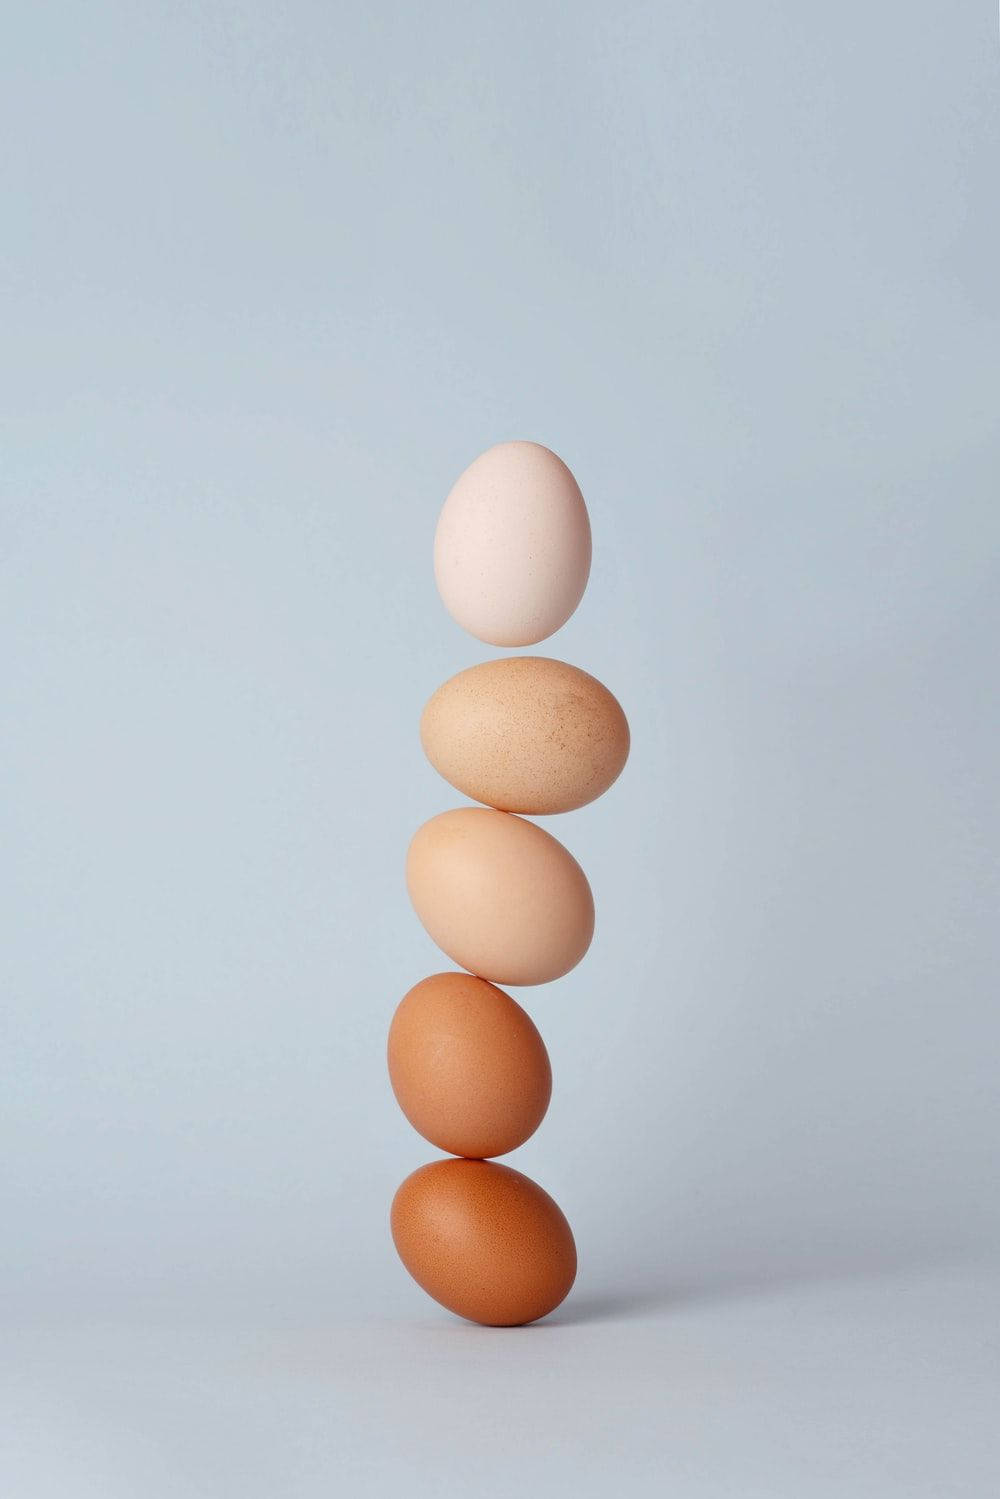 Eggs Balanced On Each Other Wallpaper